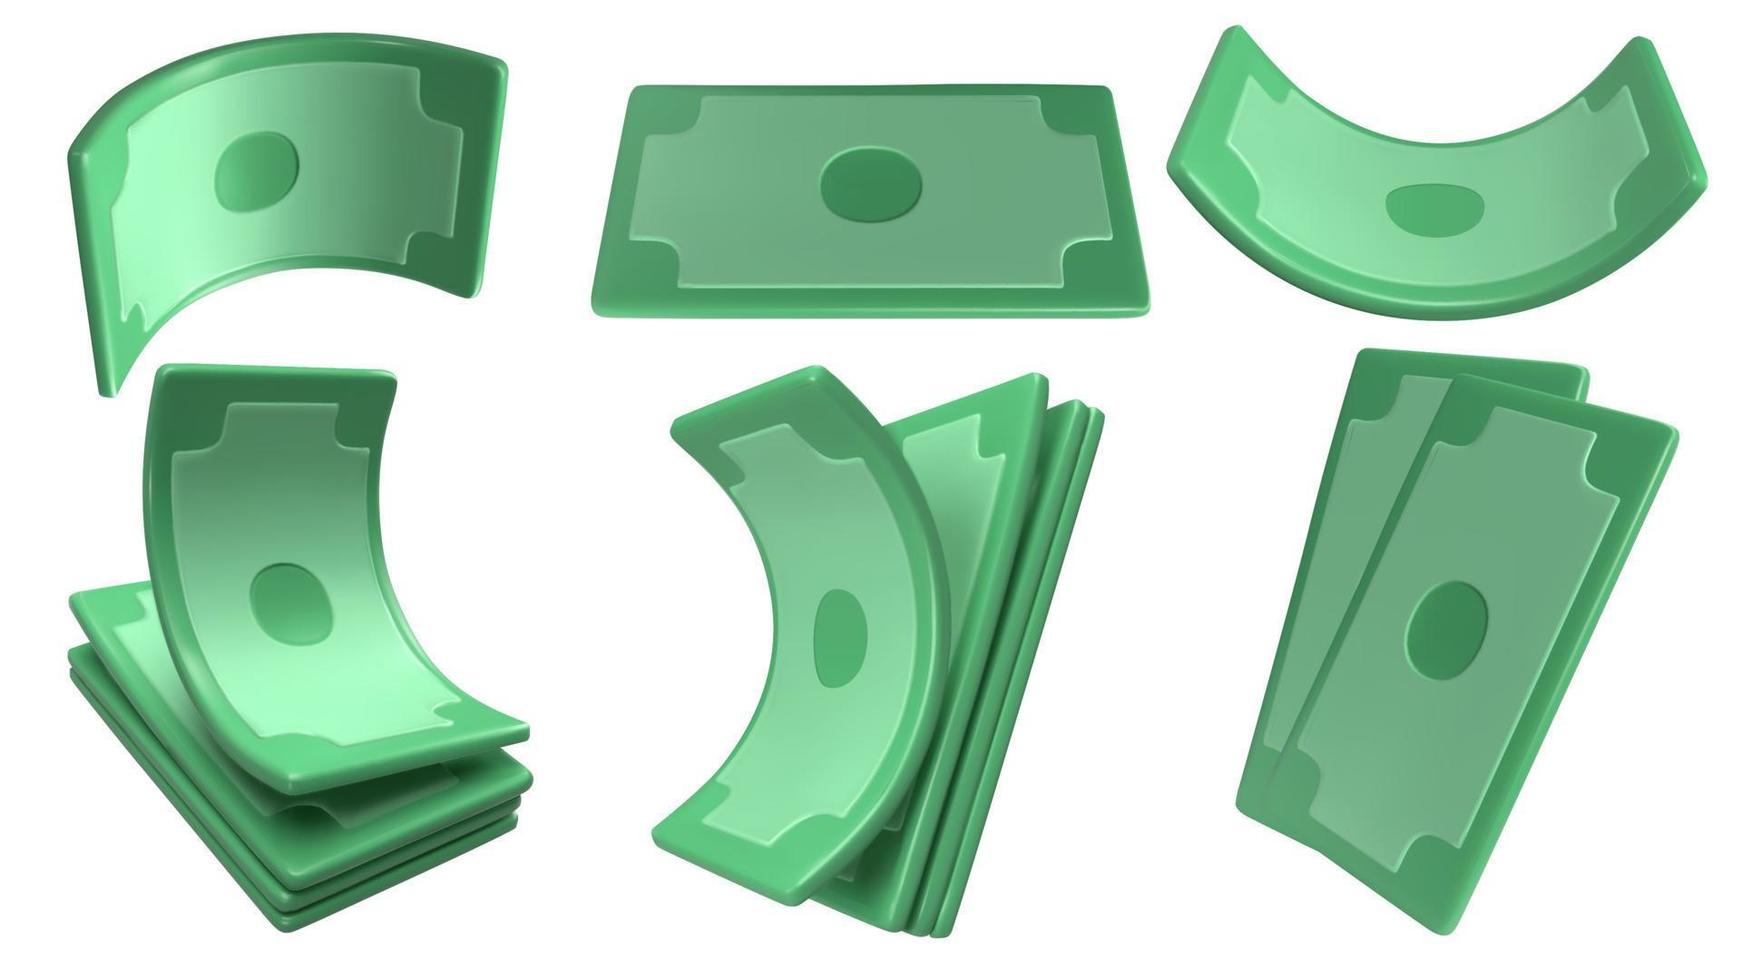 Realistic money set. Collection of 3D green dollars . Twisted paper bills and stack of currency banknotes. Vector